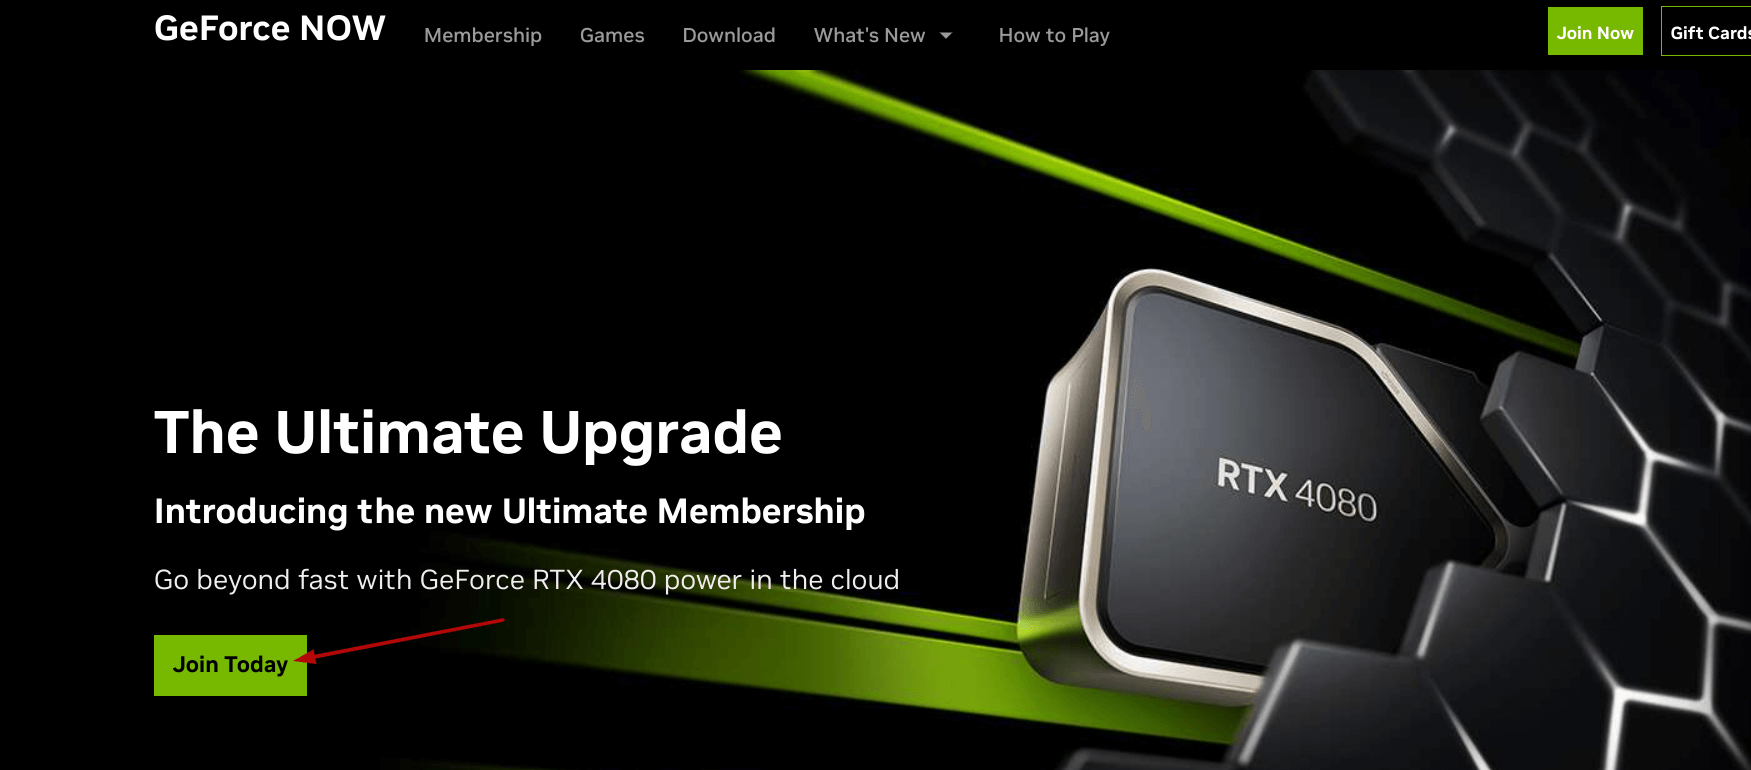 Joining GeForce Now